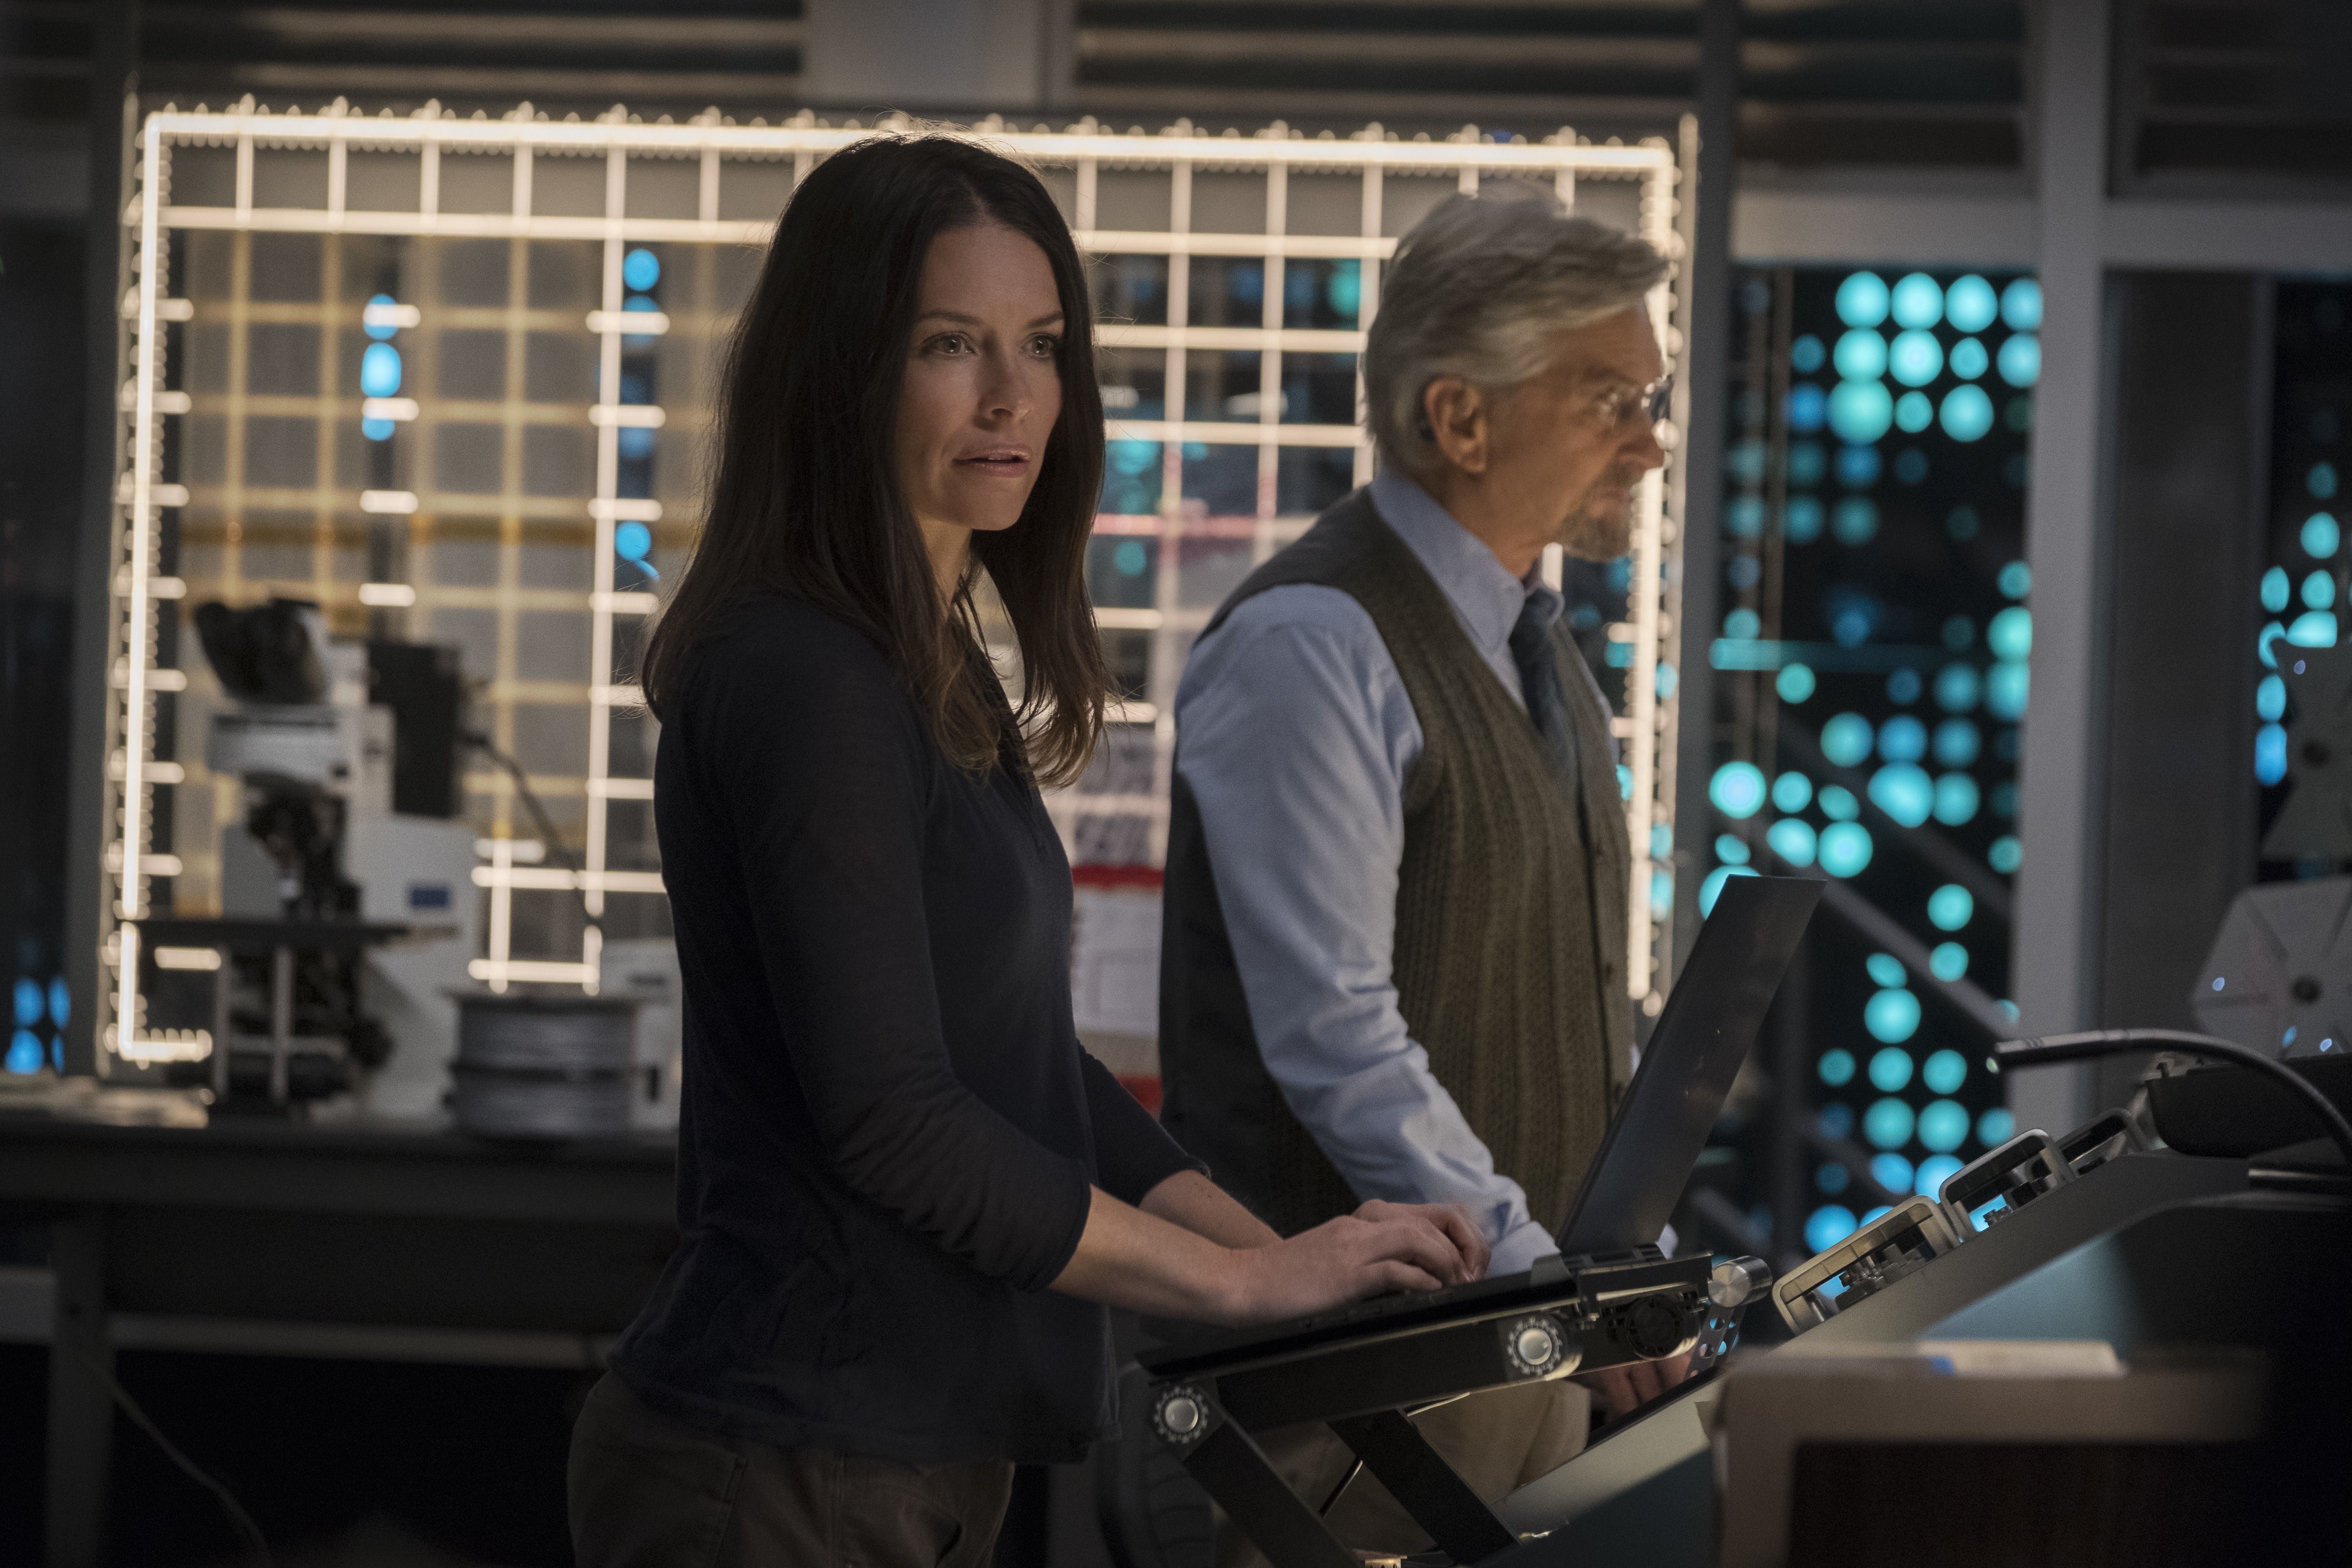 ant-man-and-the-wasp Evangeline Lilly michael douglas